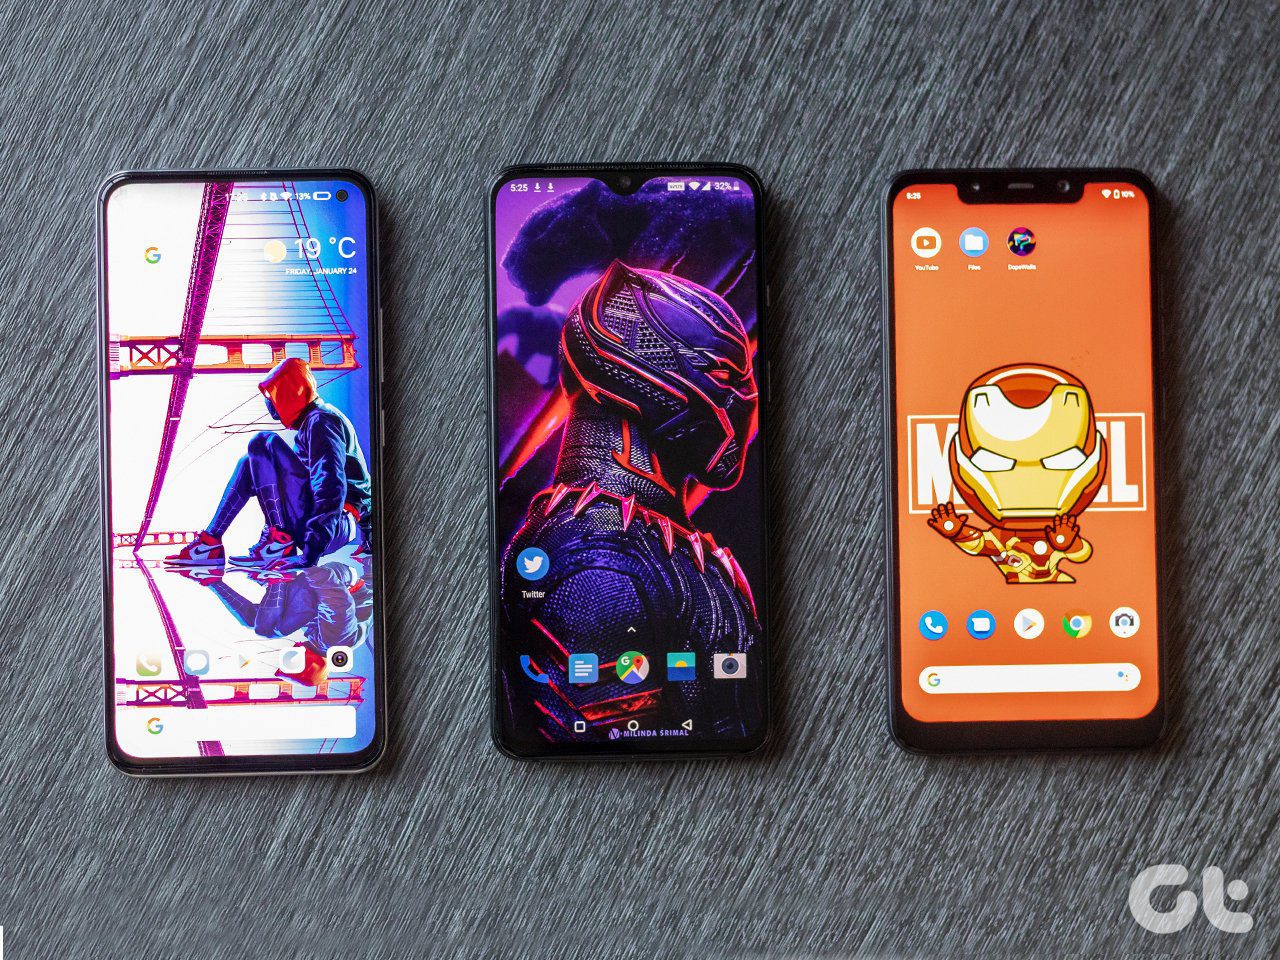 9 Best Wallpaper Android Apps in 2020